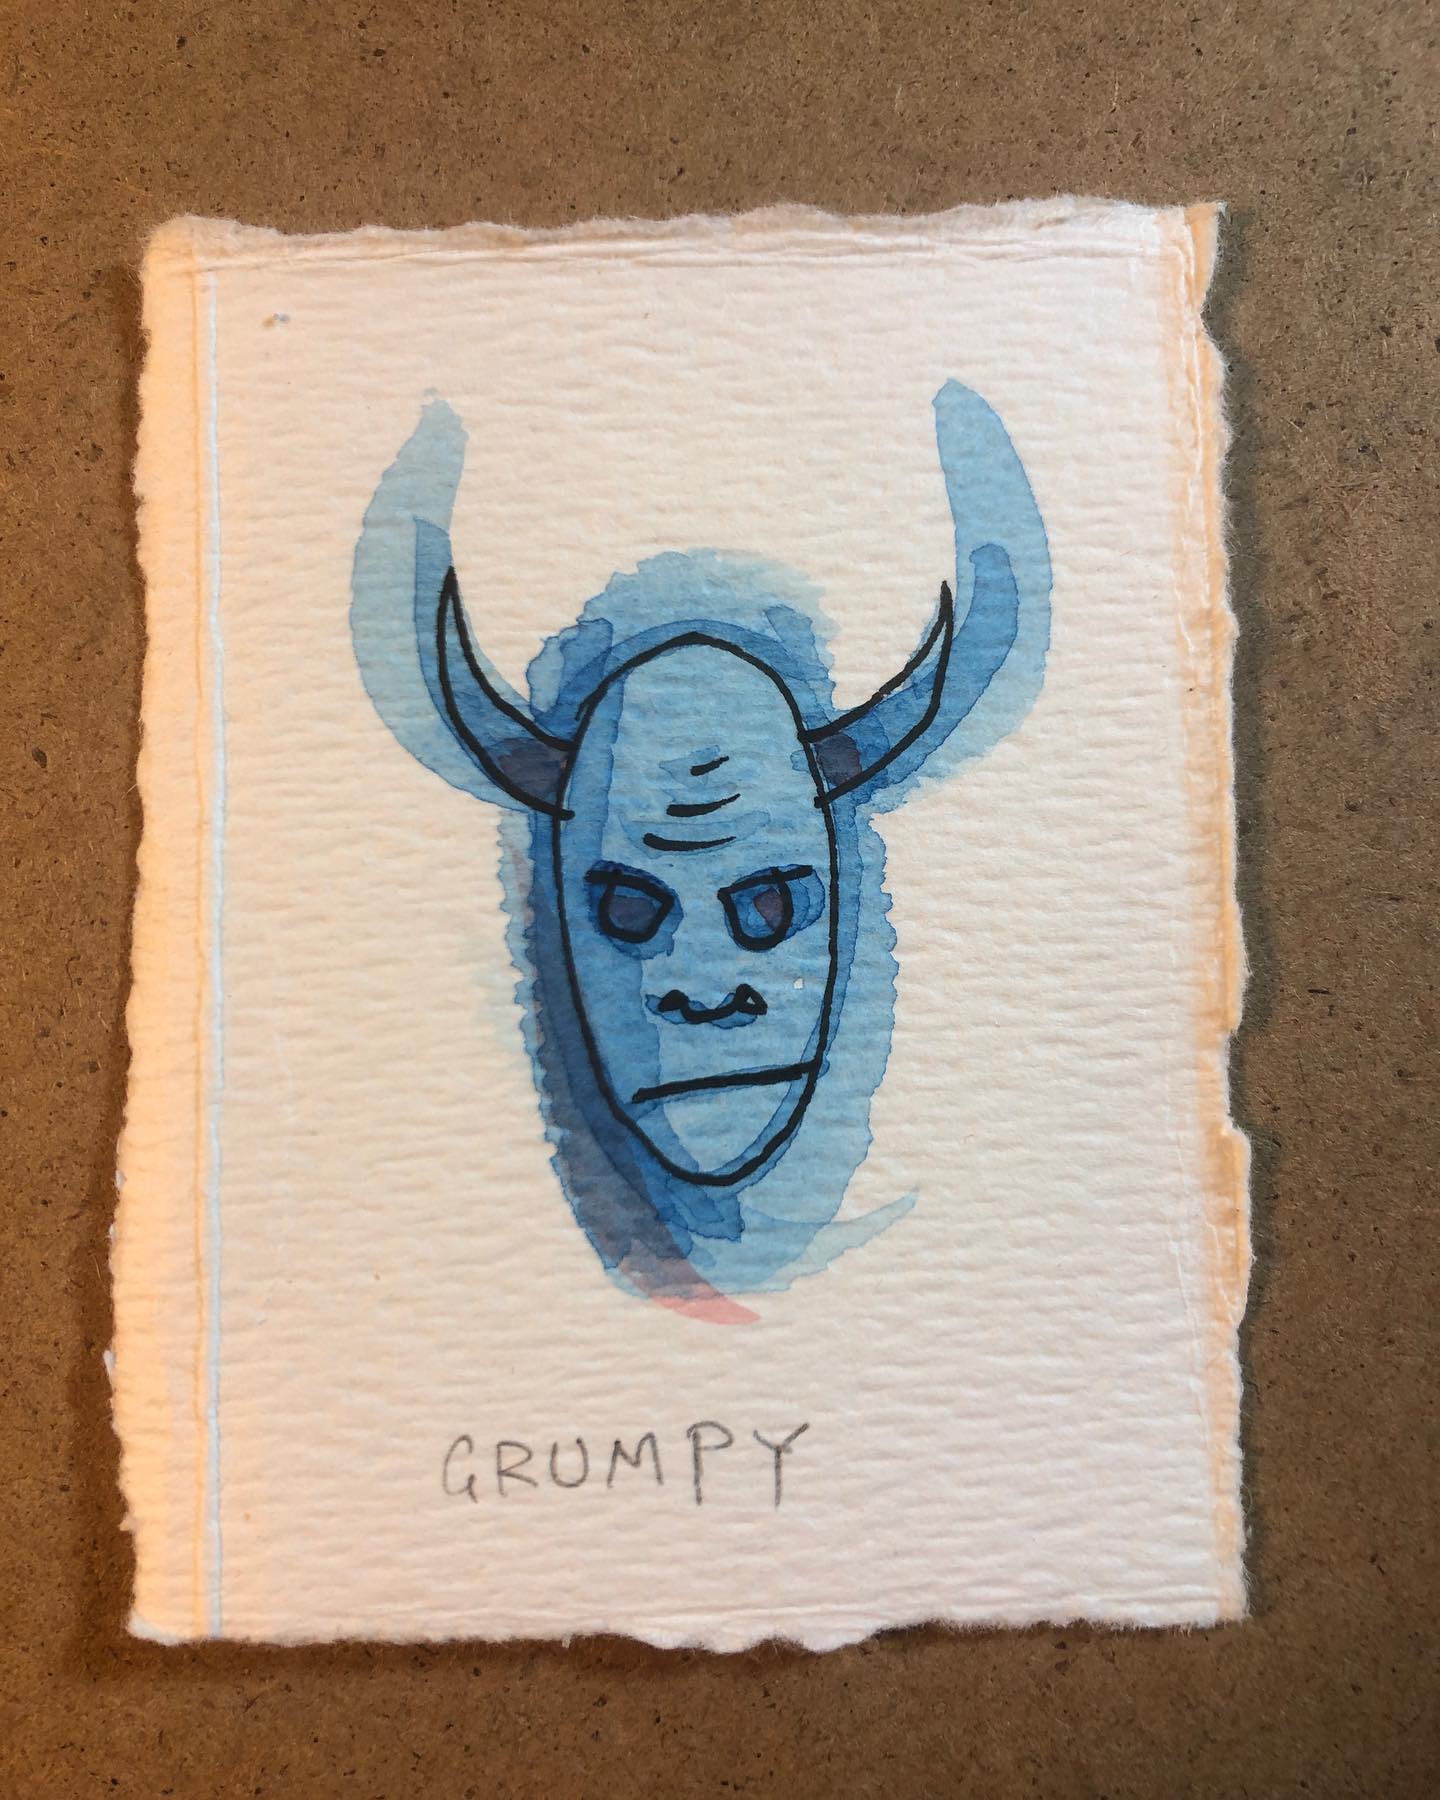 Watercolor and ink drawing of a grumpy looking demon with horns